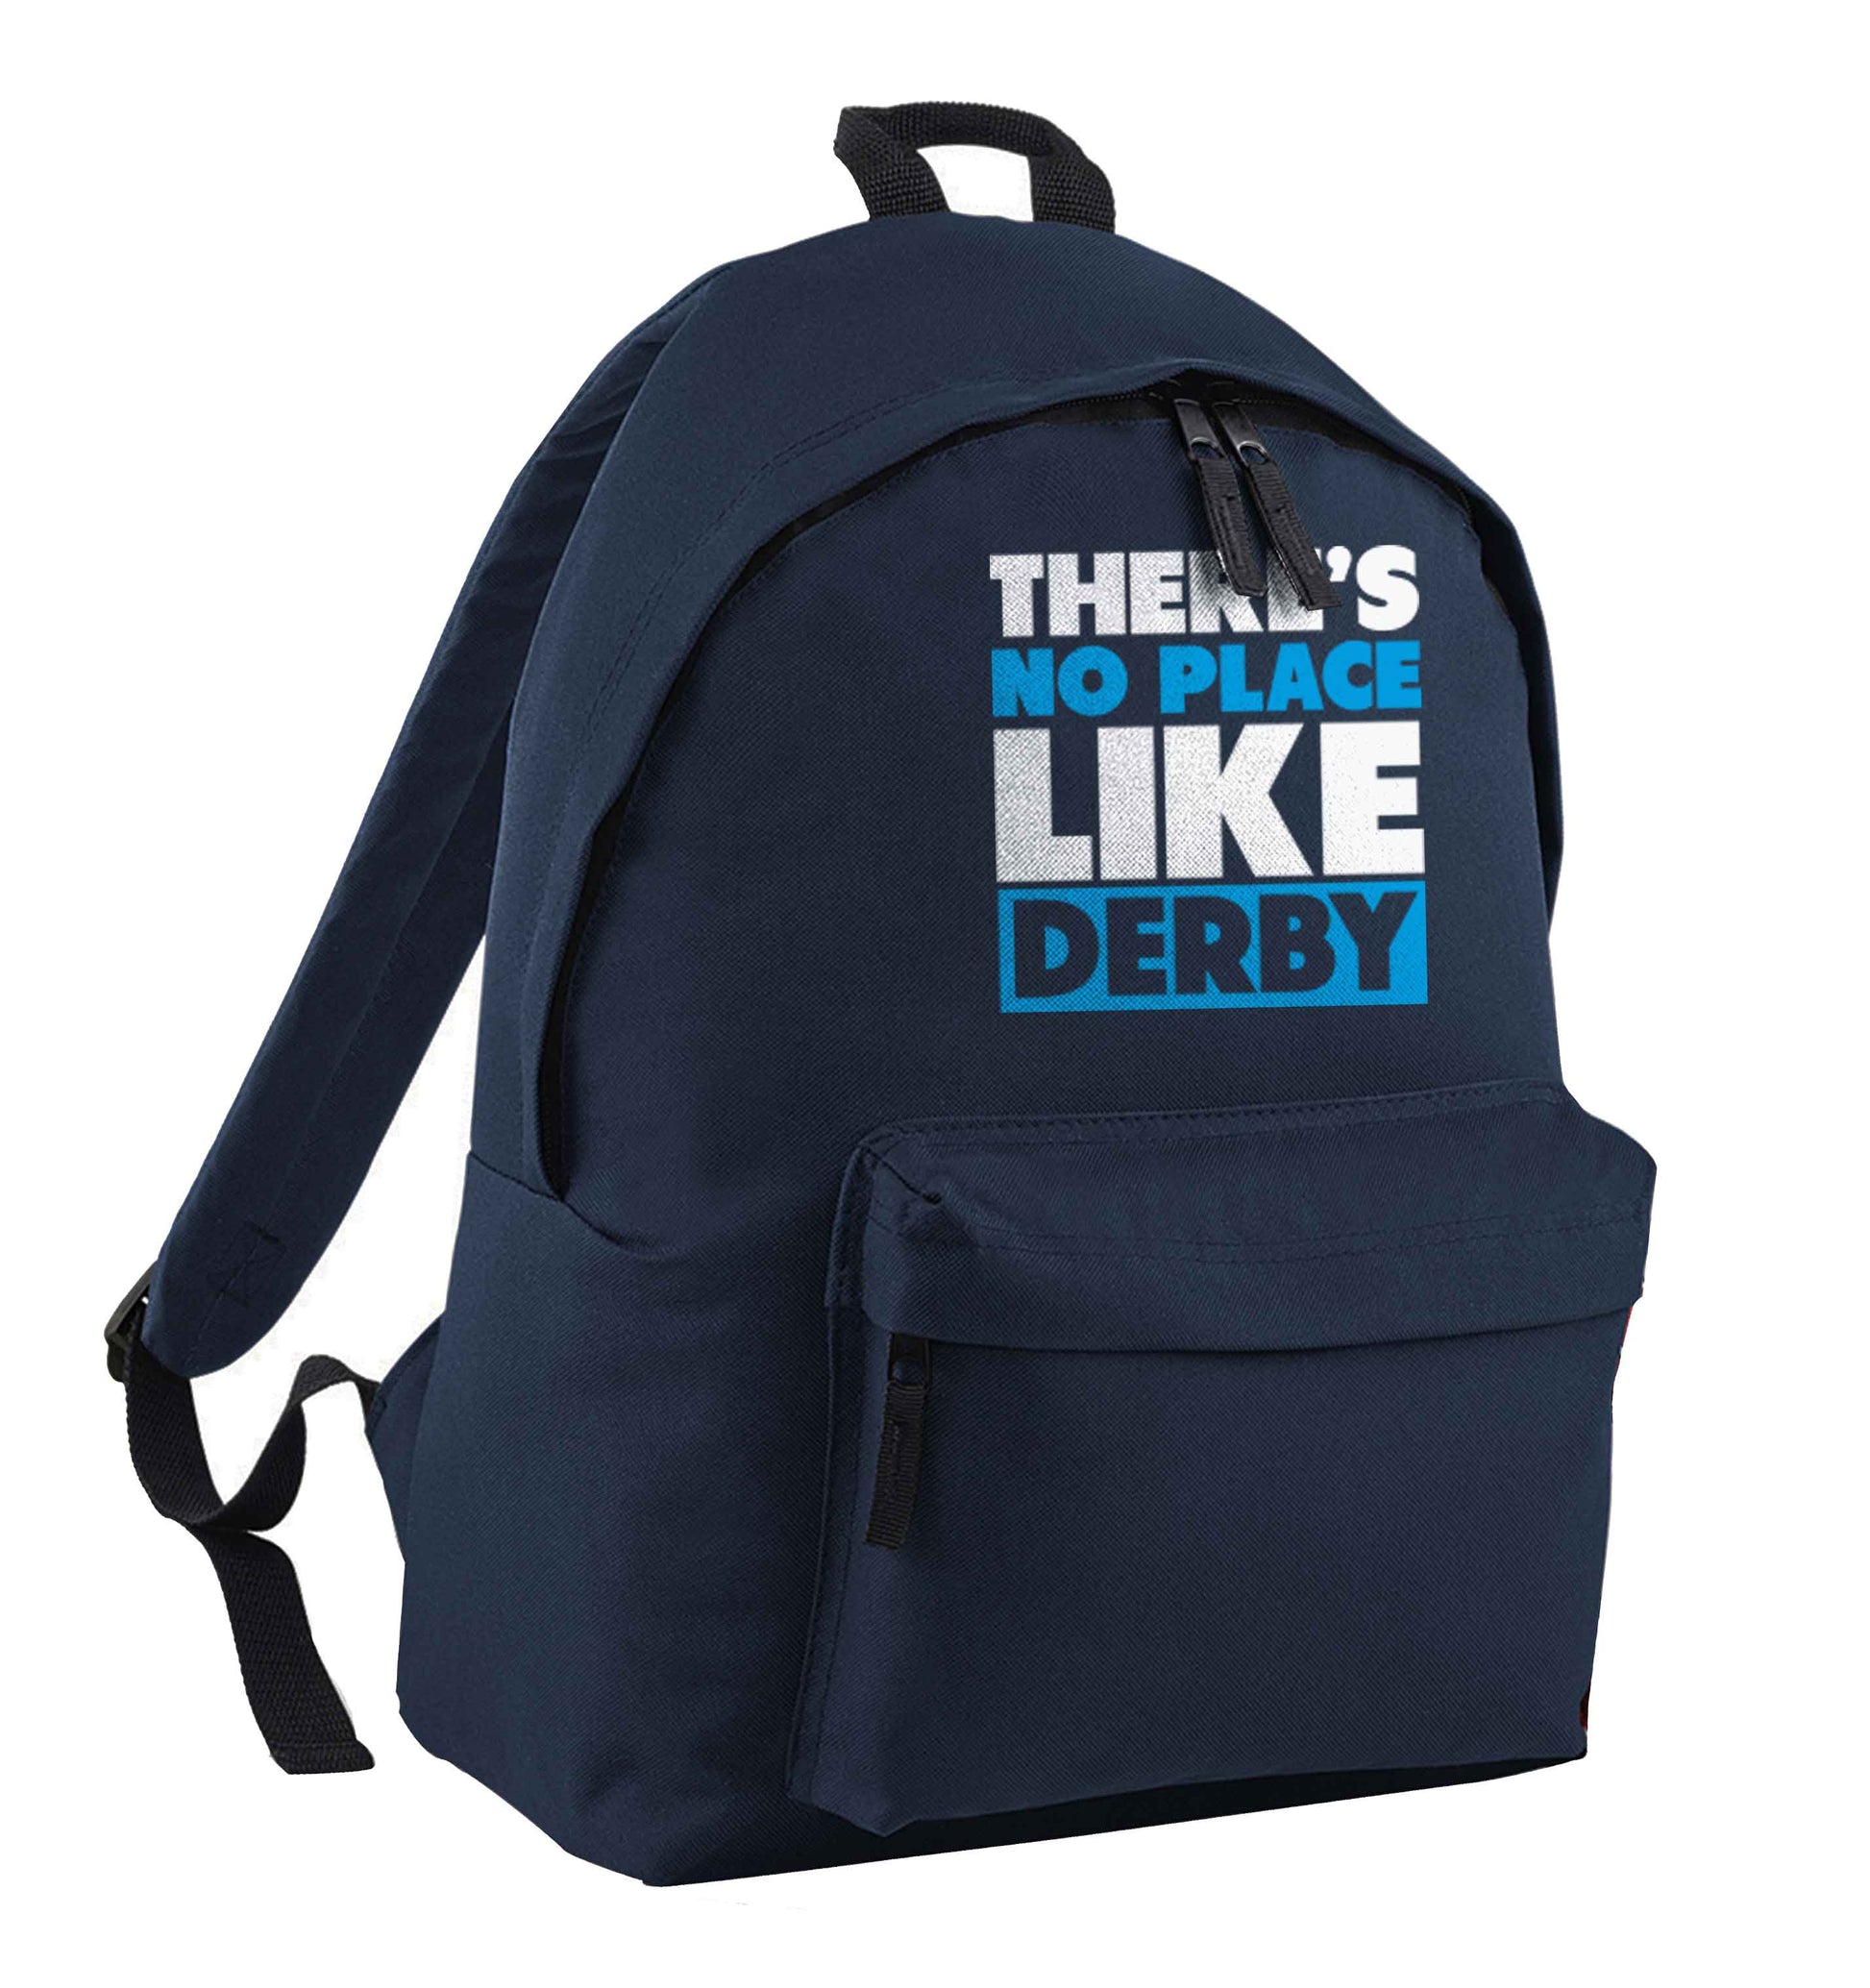 There's no place like Derby navy adults backpack